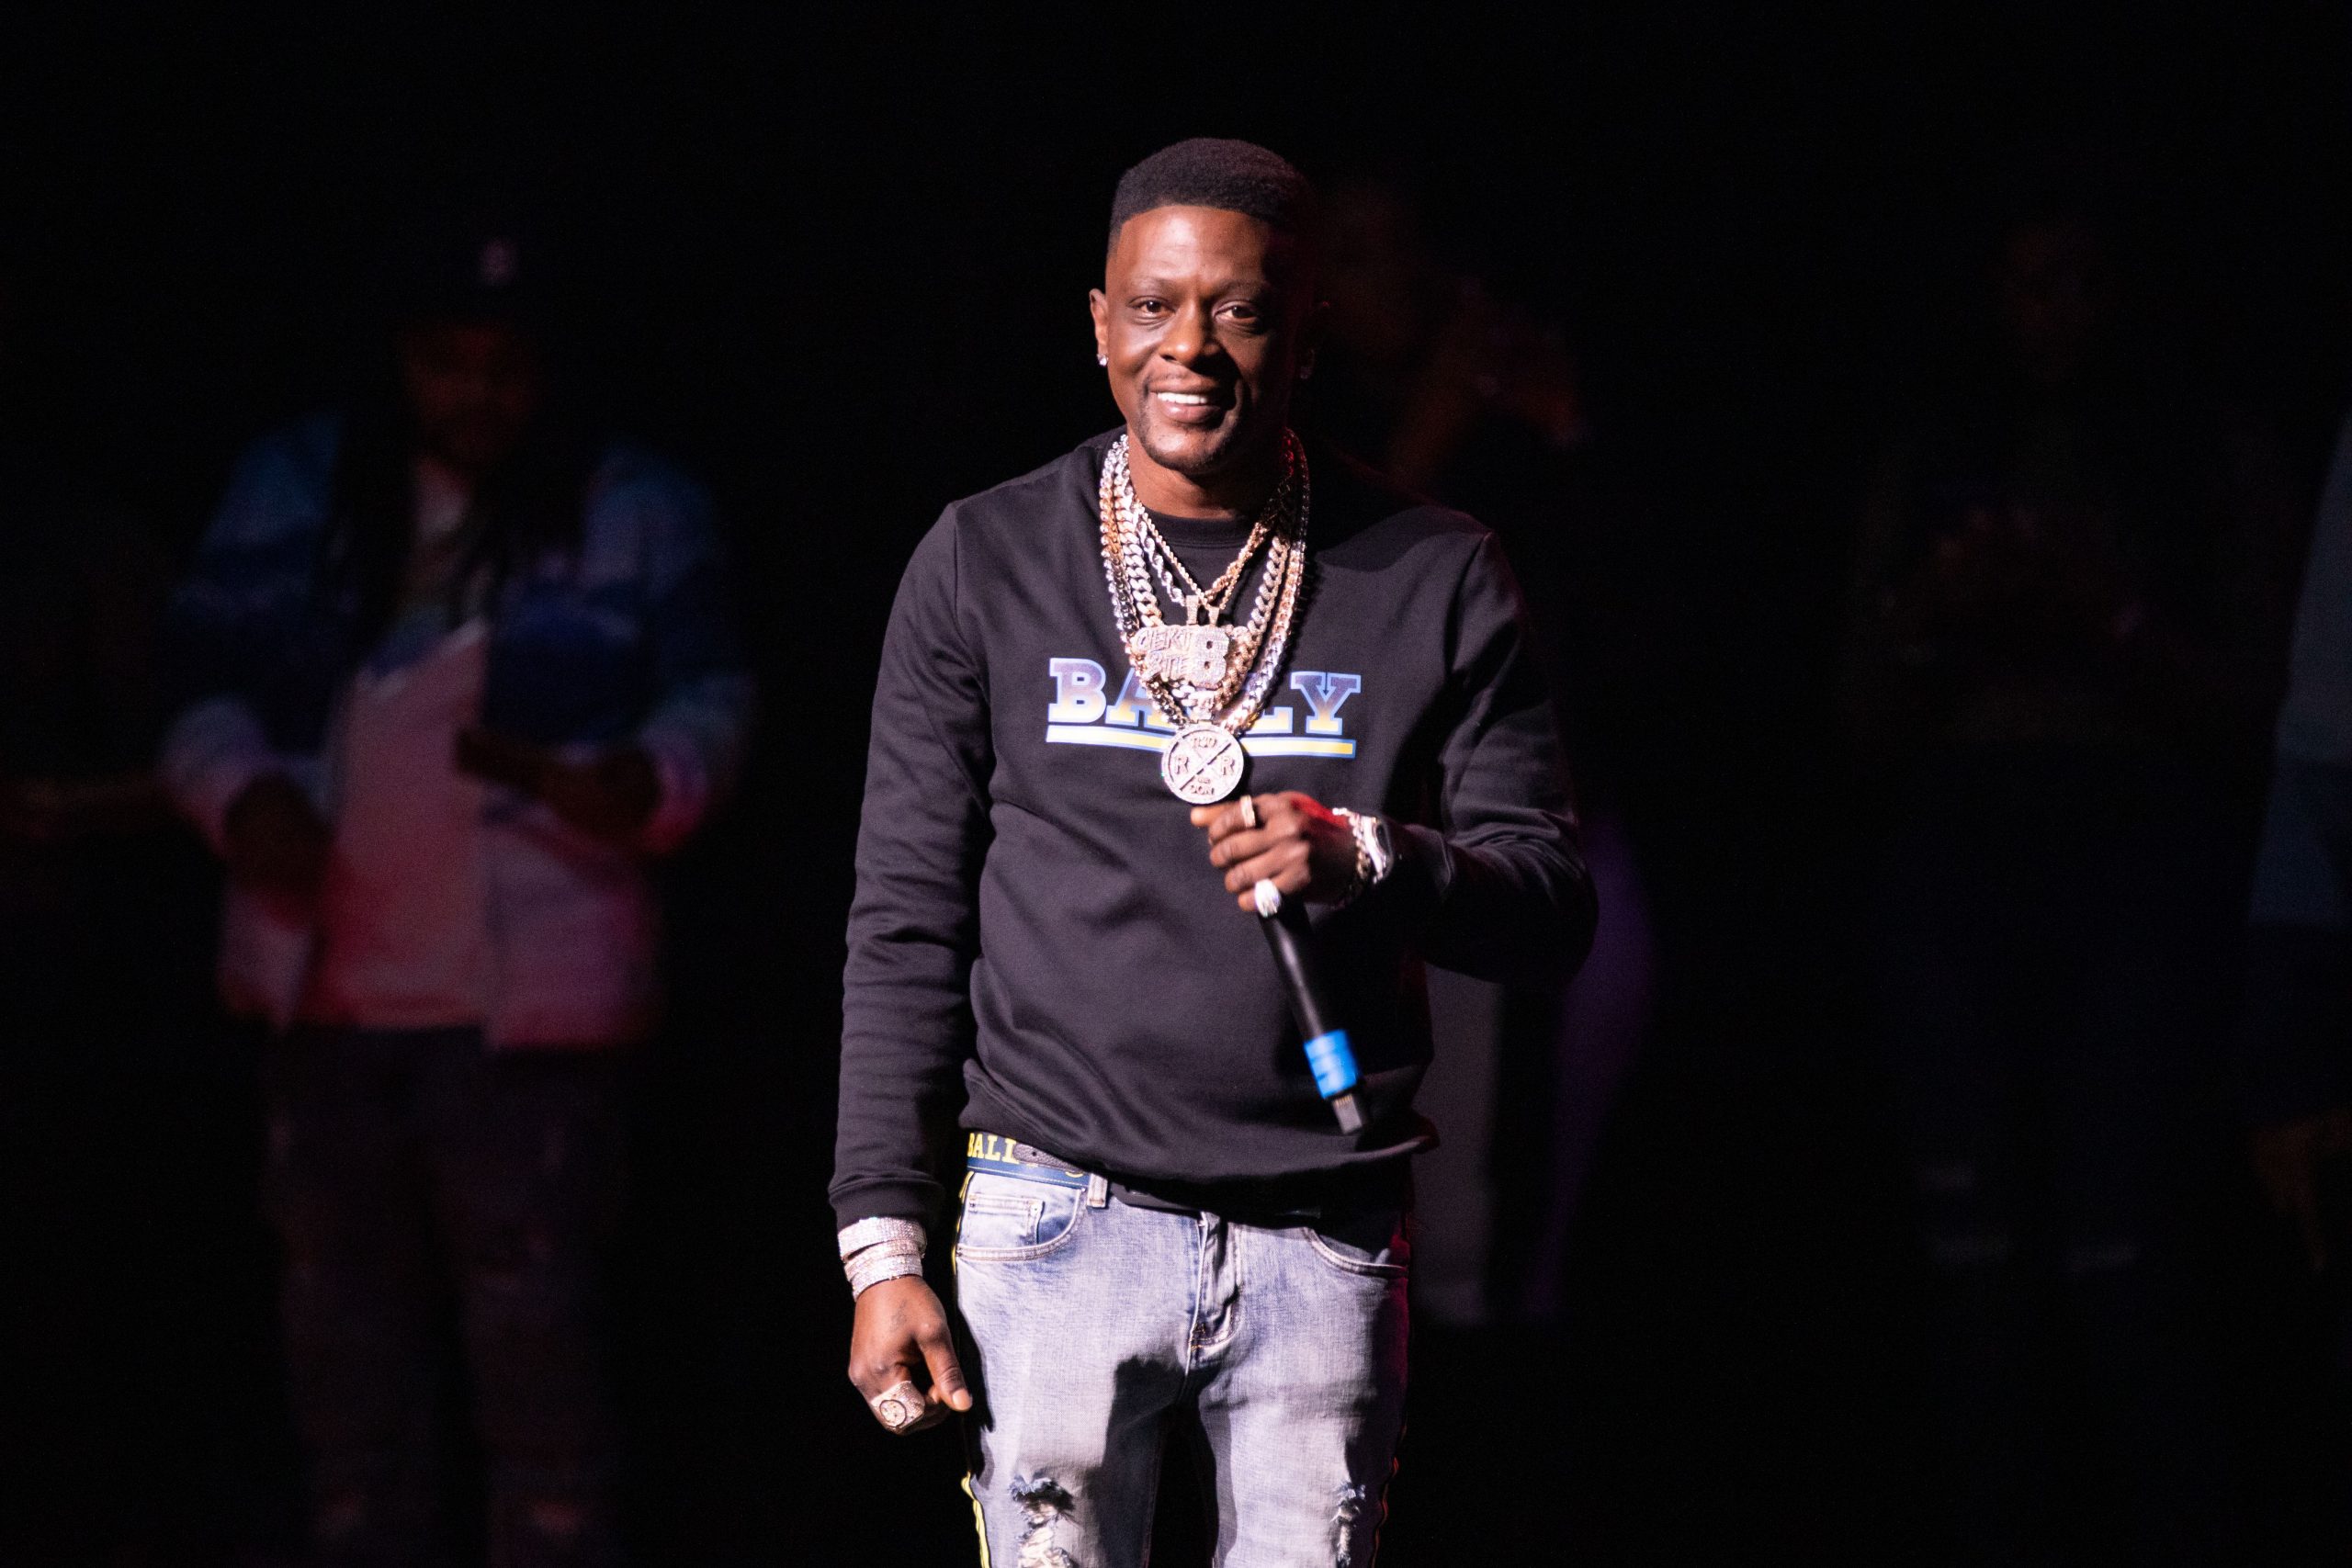 Yung Bleu Gifts Boozie Badazz $100K for Supporting Him